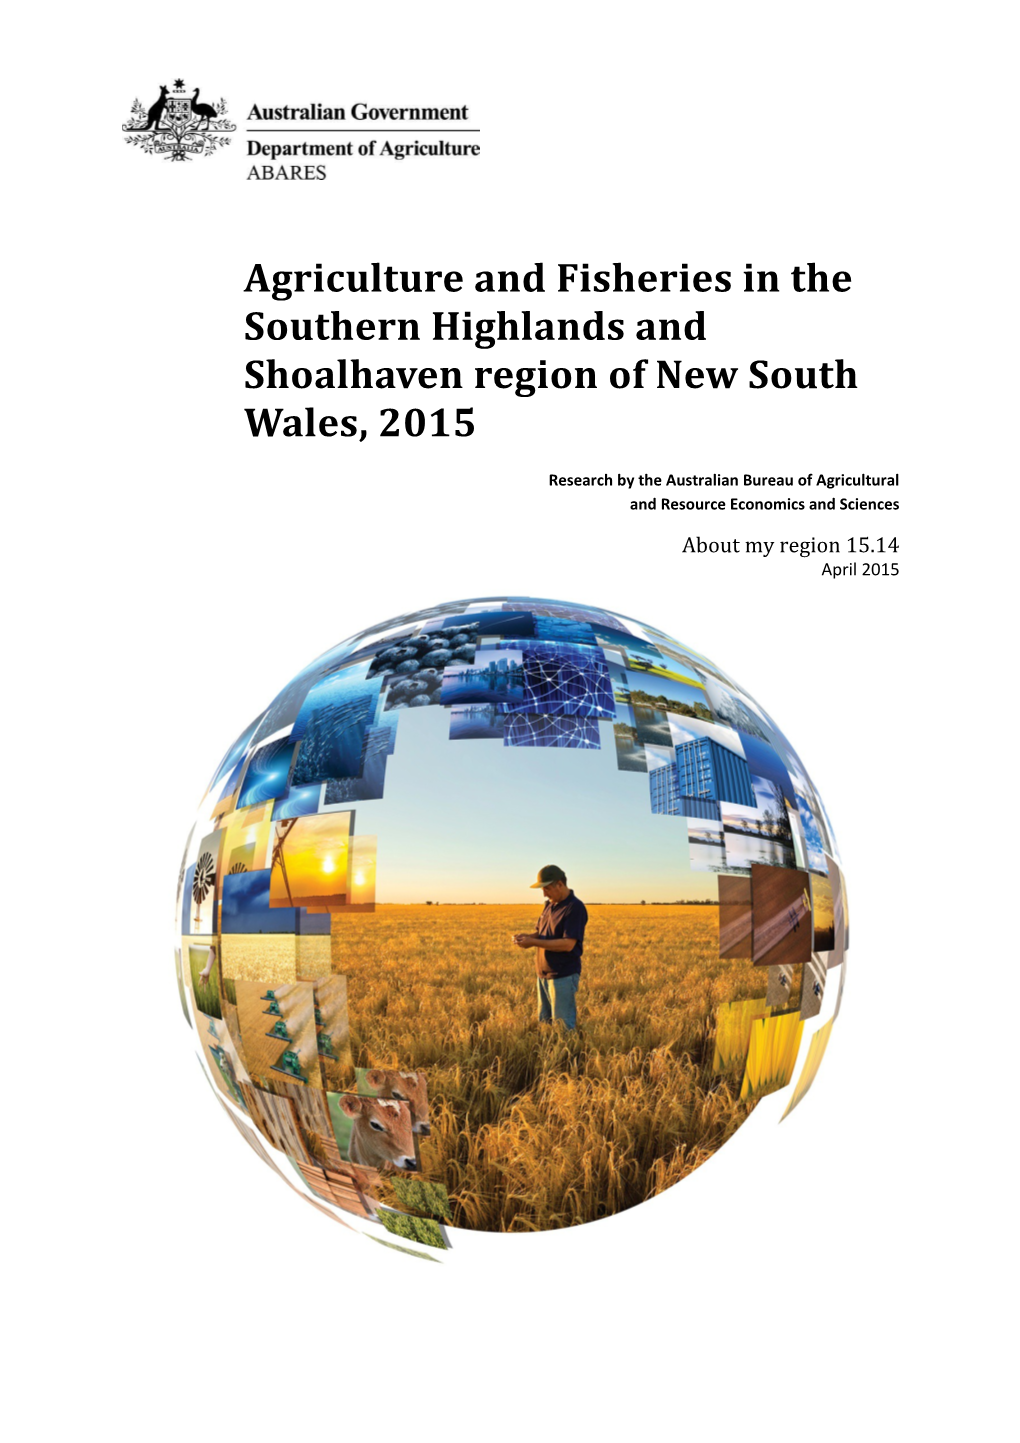 Agriculture and Fisheries in the Southern Highlands and Shoalhaven Region of New South